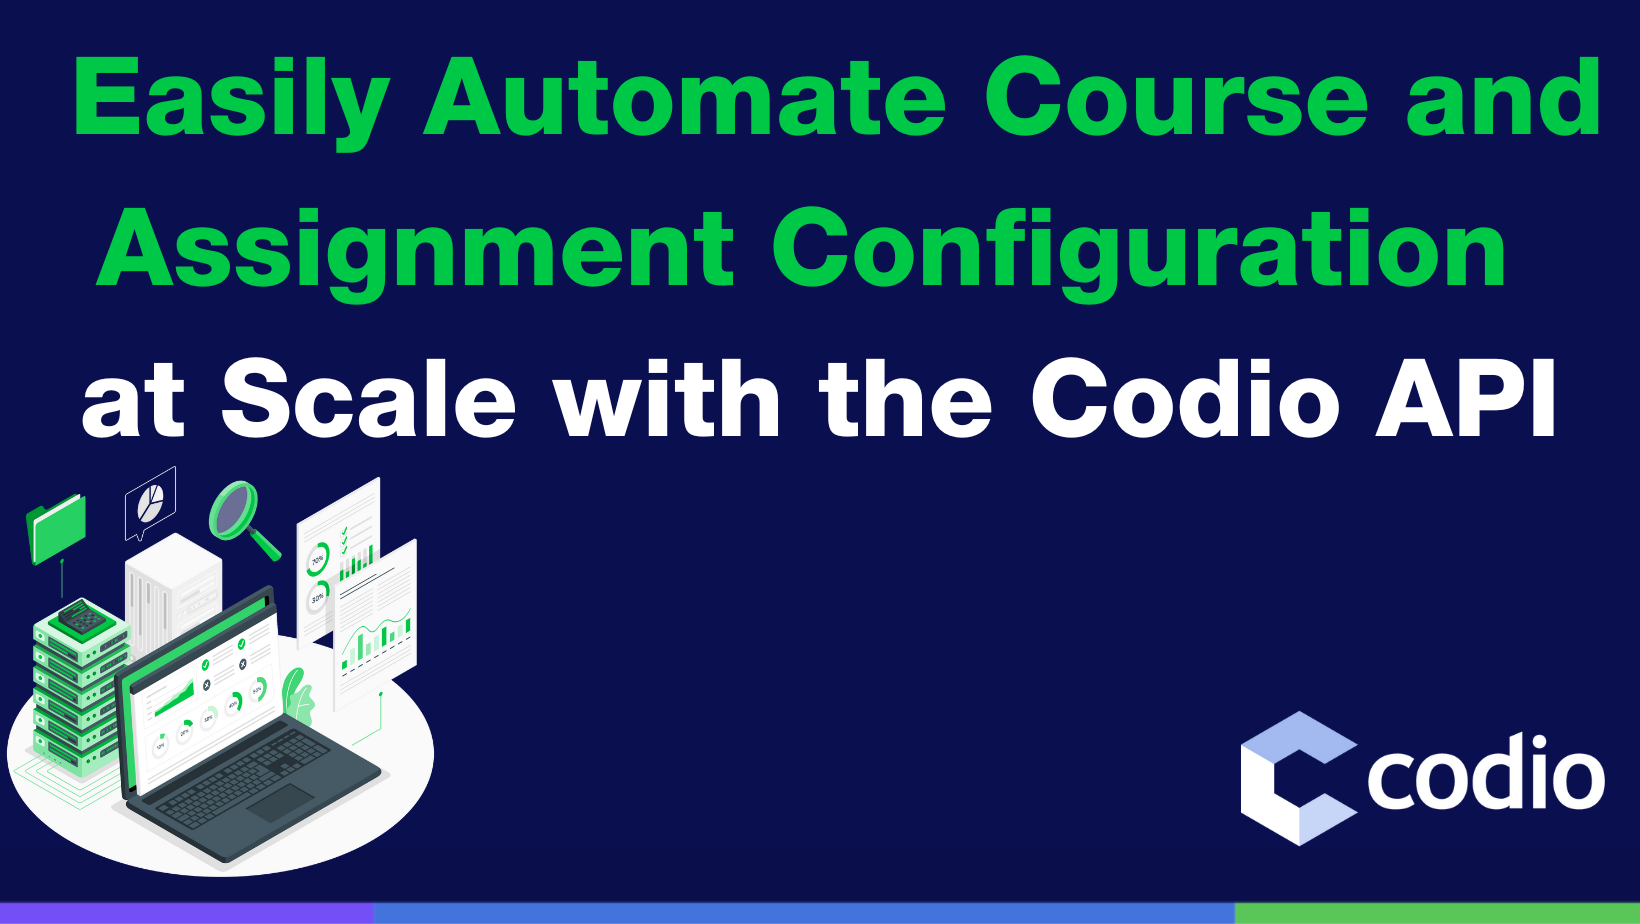 Easily Automate Course and Assignment Configuration with Codio's API